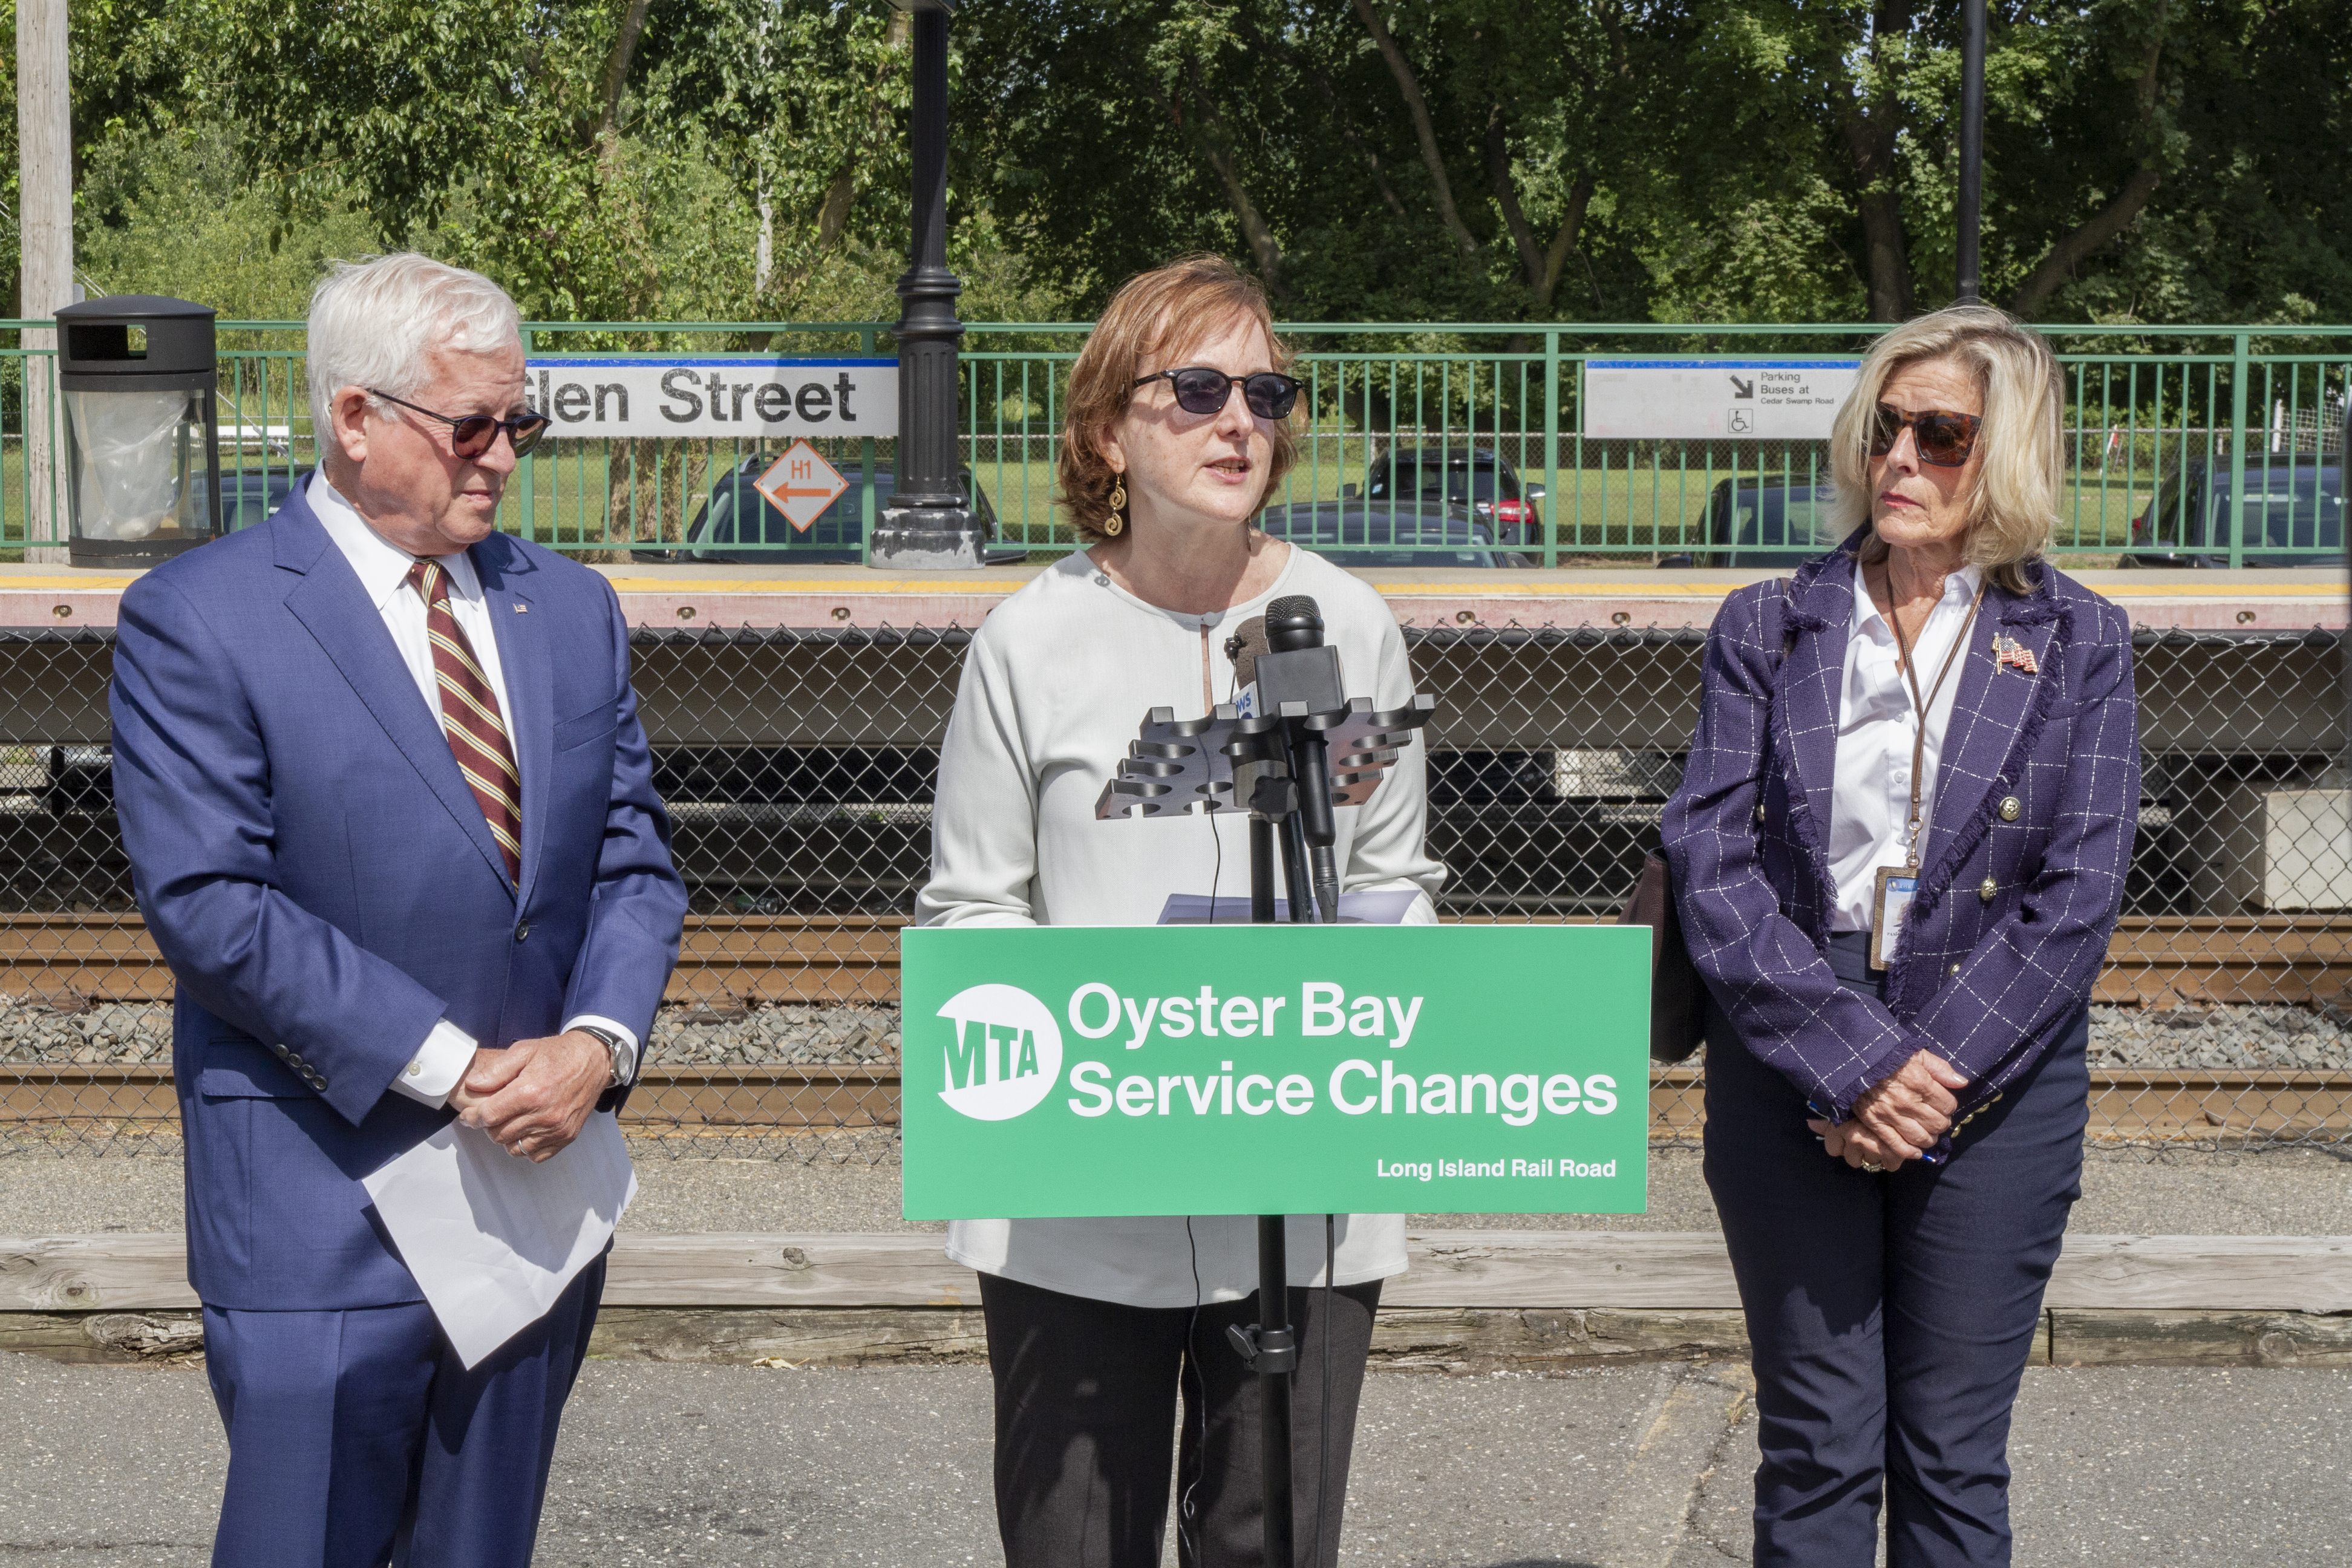 MTA Details Schedule Improvements for Oyster Bay LIRR Customers